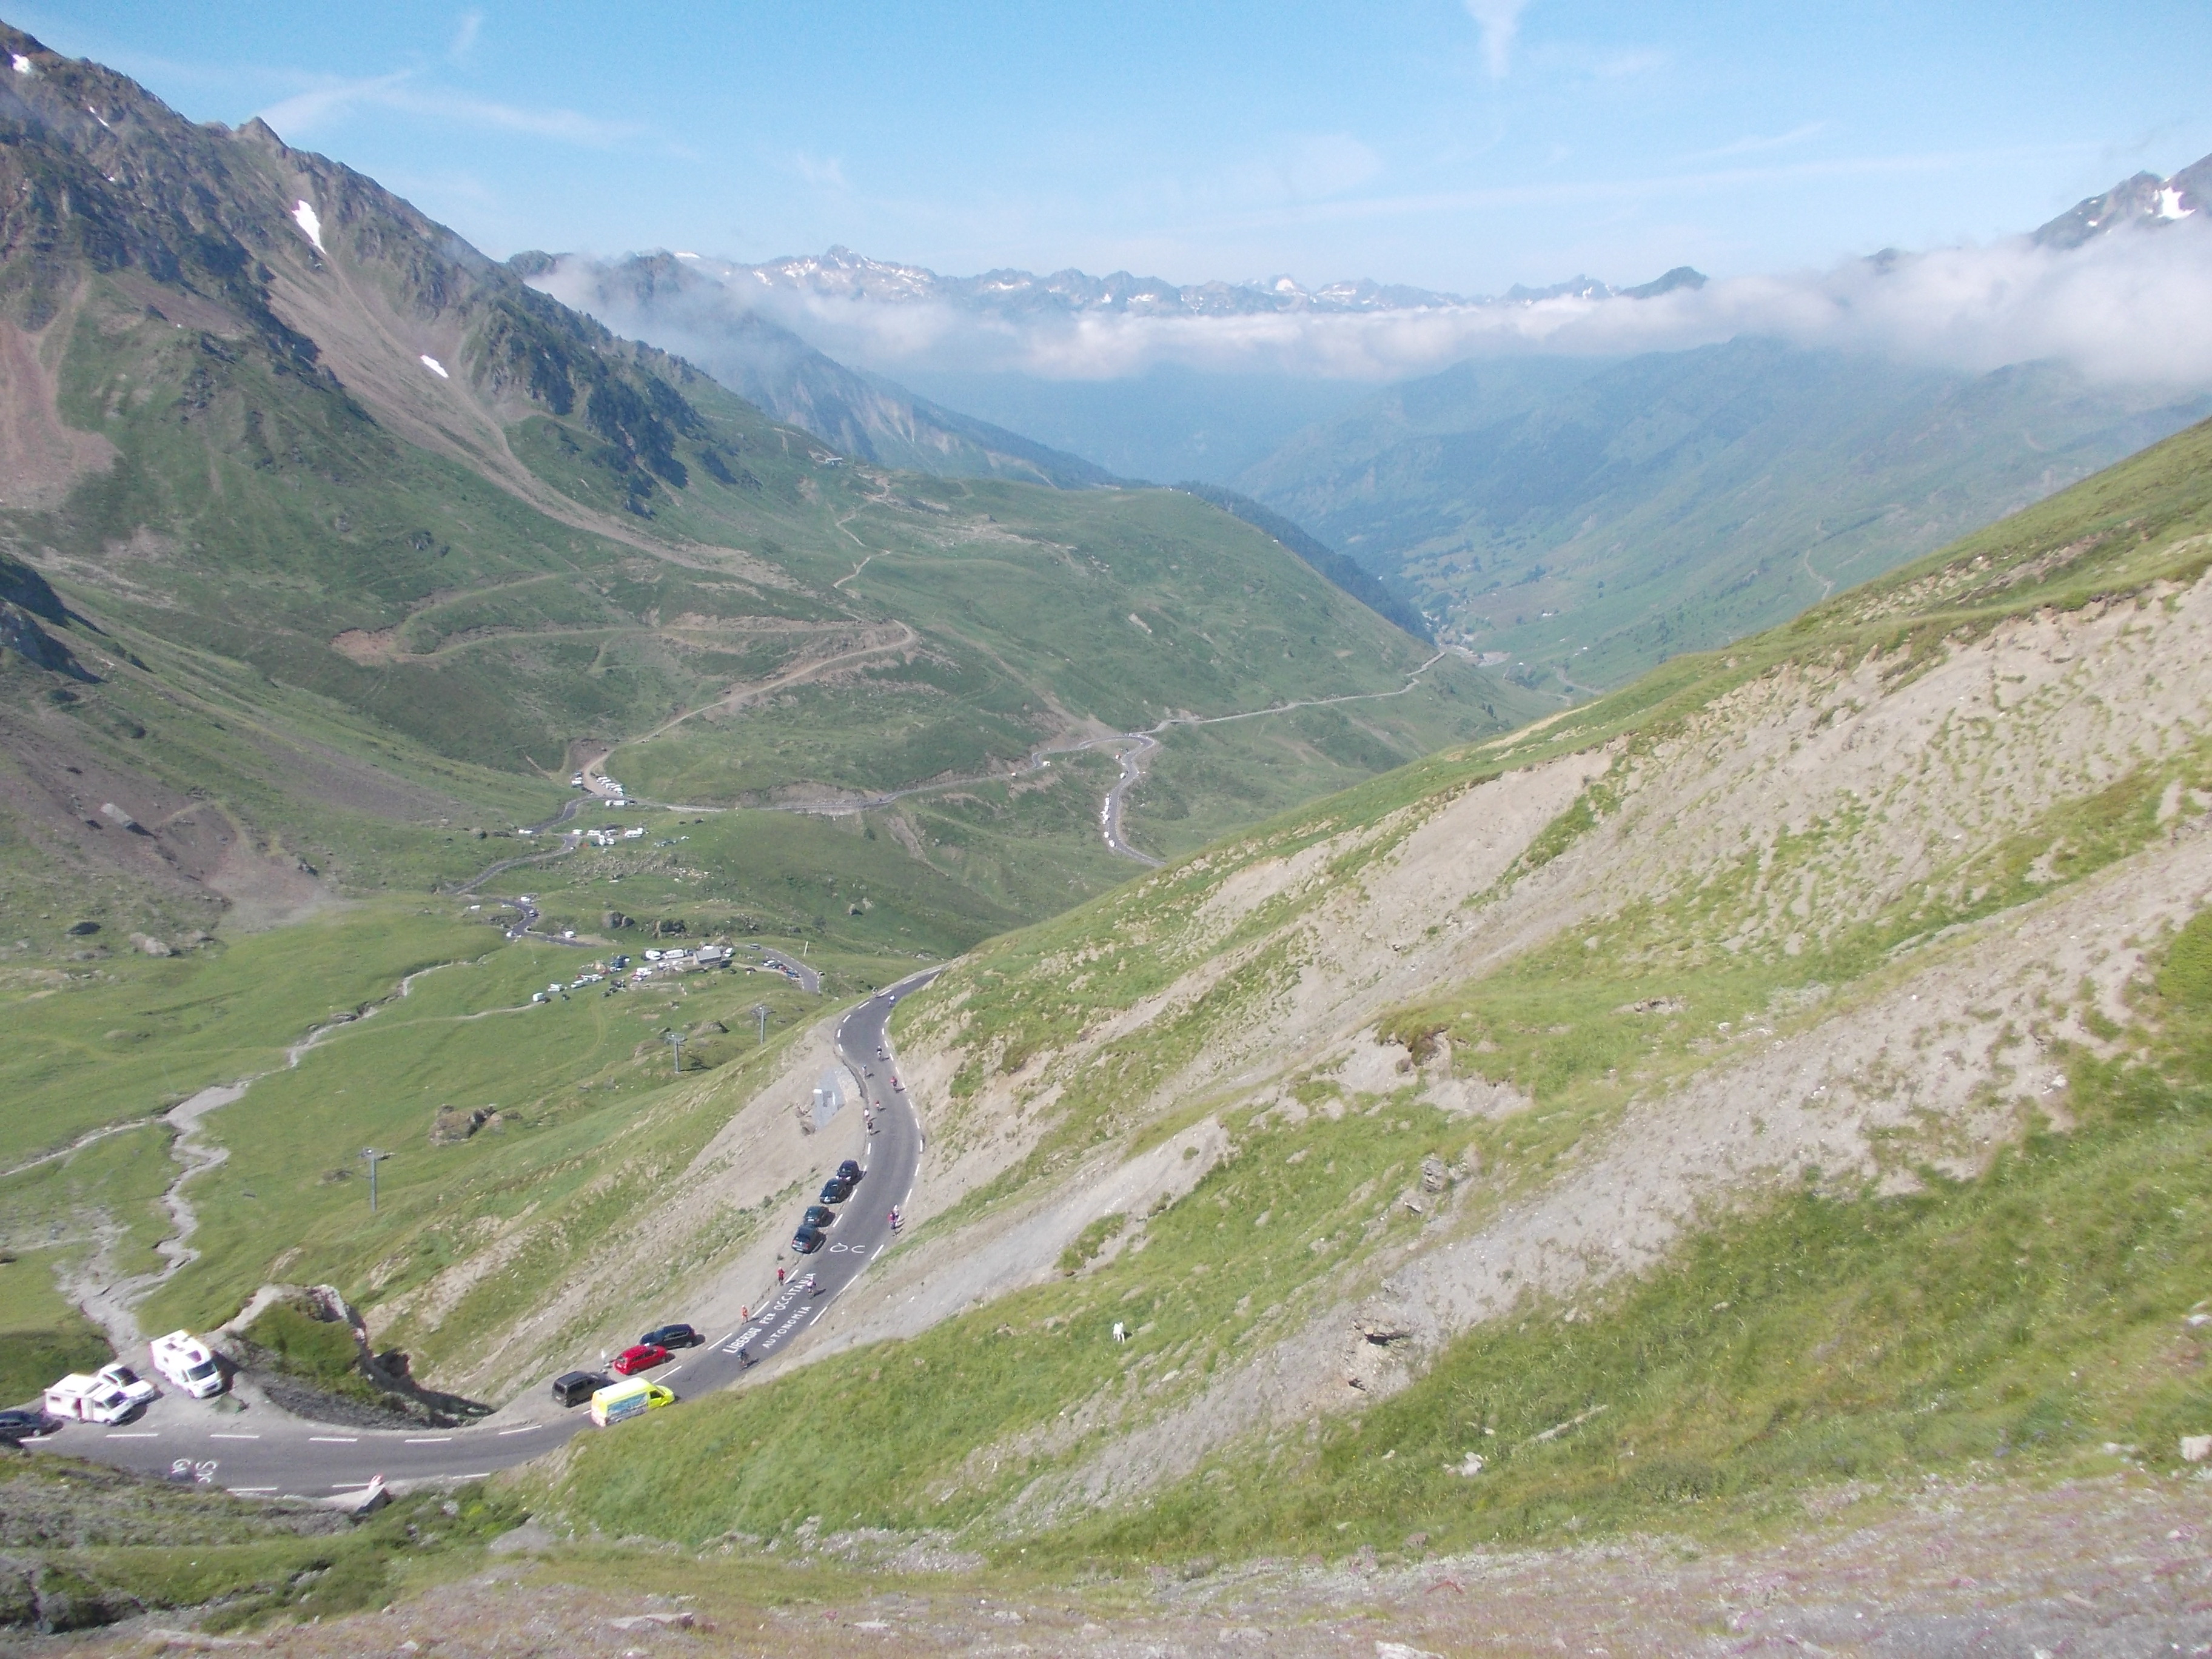 View from Tourmalet